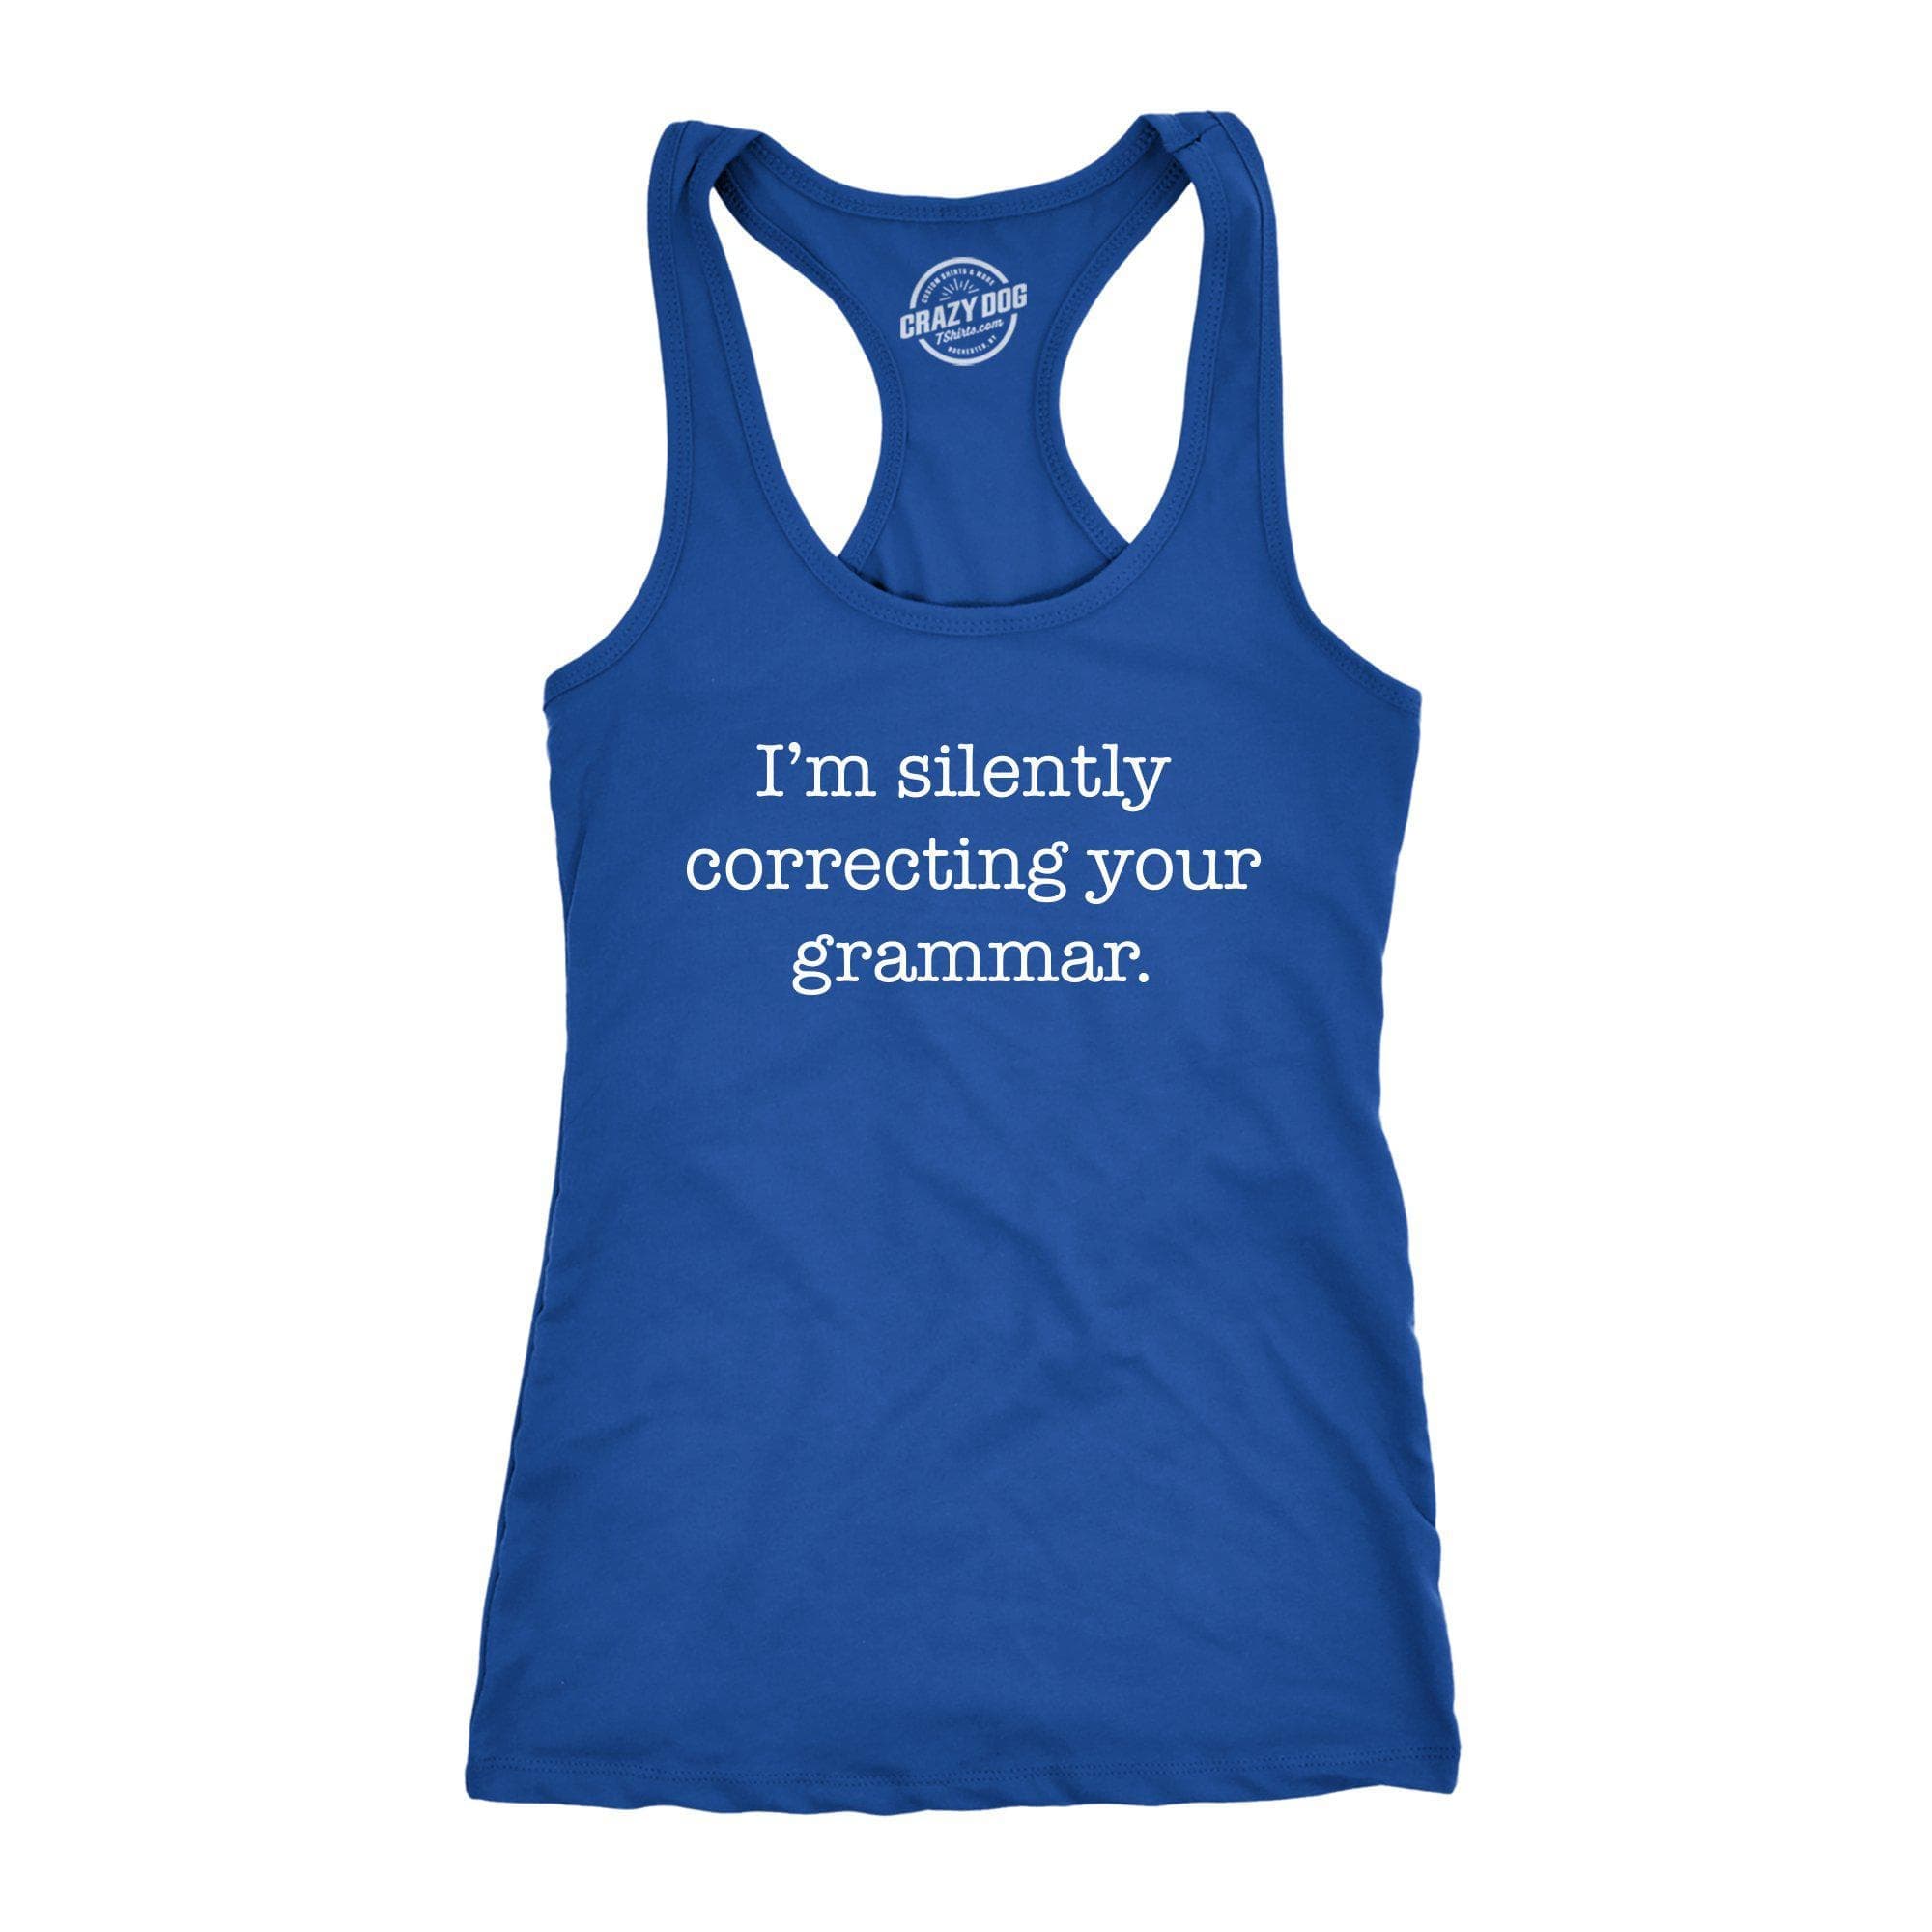 I'm Silently Correcting Your Grammar Women's Tank Top - Crazy Dog T-Shirts